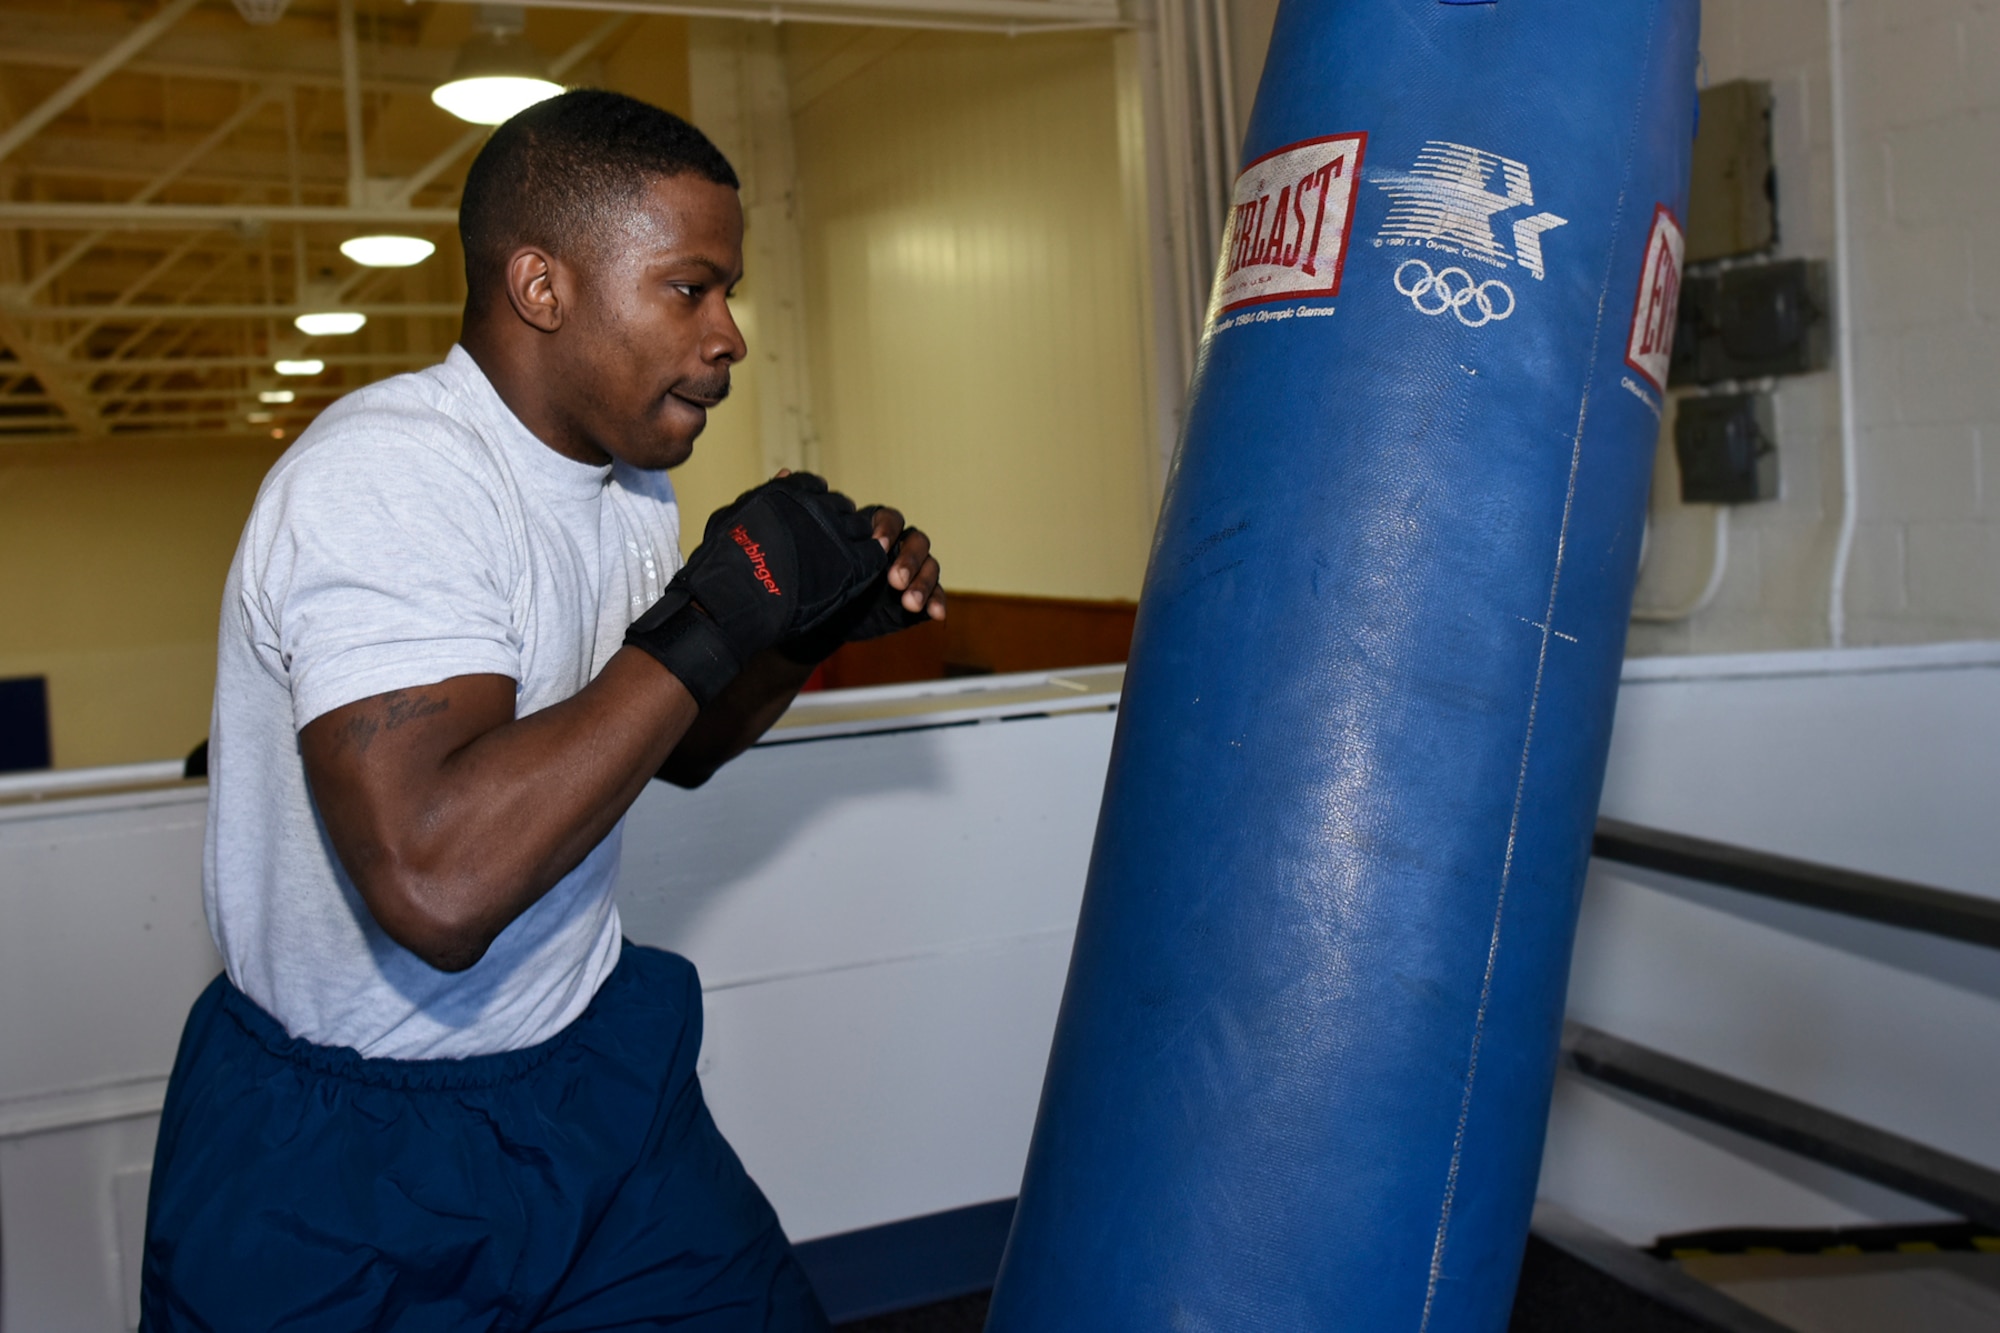 Airman 1st Class Onnie McSpadden works out with a heavy bag in the gym at Selfridge Air National Guard Base, Mich., April 28, 2015. McSpadden is a former boxer who now serves as a member of the 127th Wing, Michigan Air National Guard at Selfridge. (U.S. Air National Guard photo by Terry Atwell)